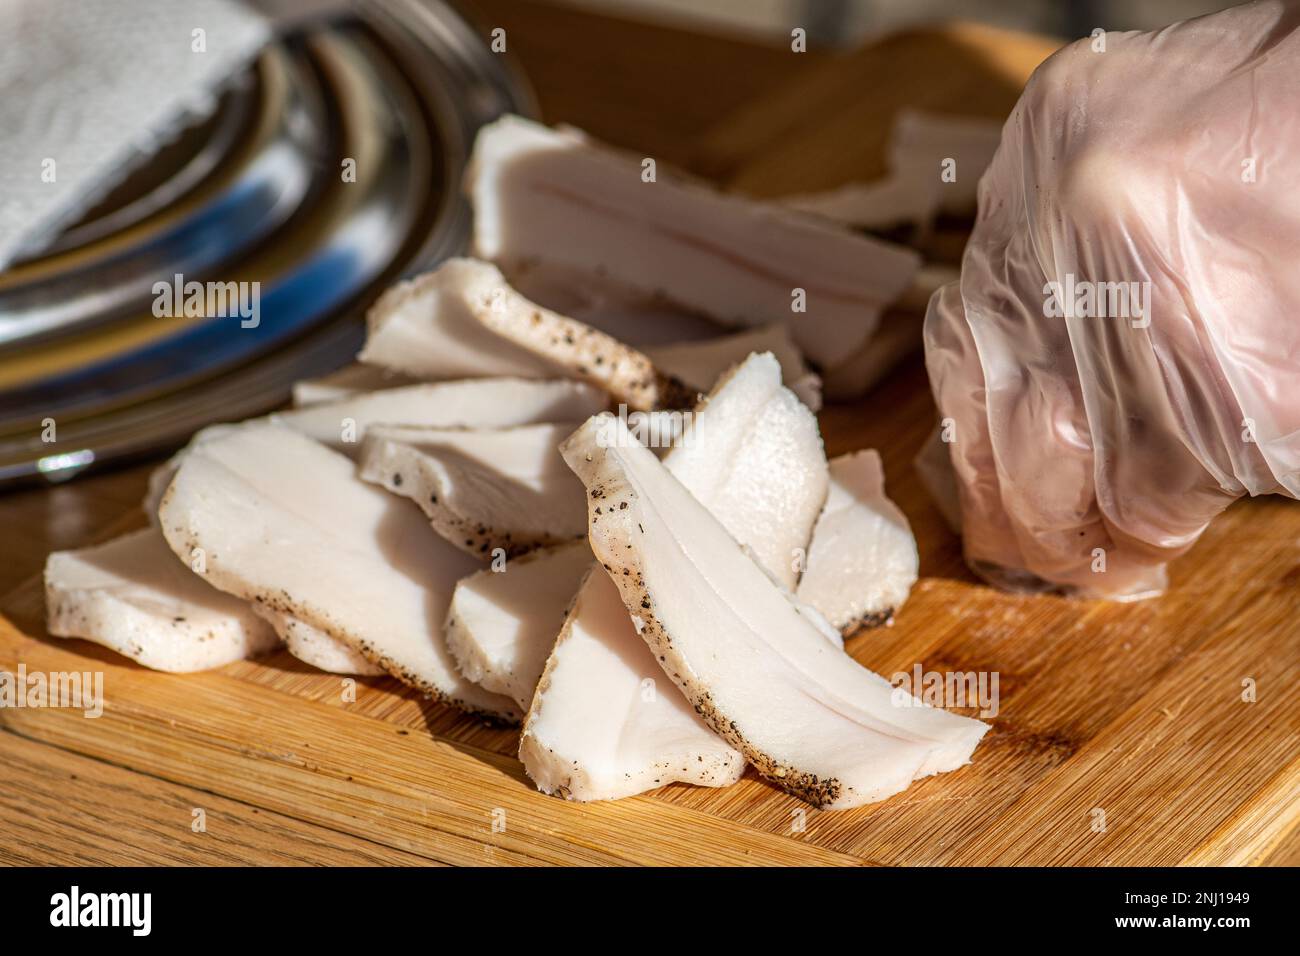 Pieces of lard or bacon, sliced thinly for consumption, on a wooden cutting board in a street food market, close up Stock Photo